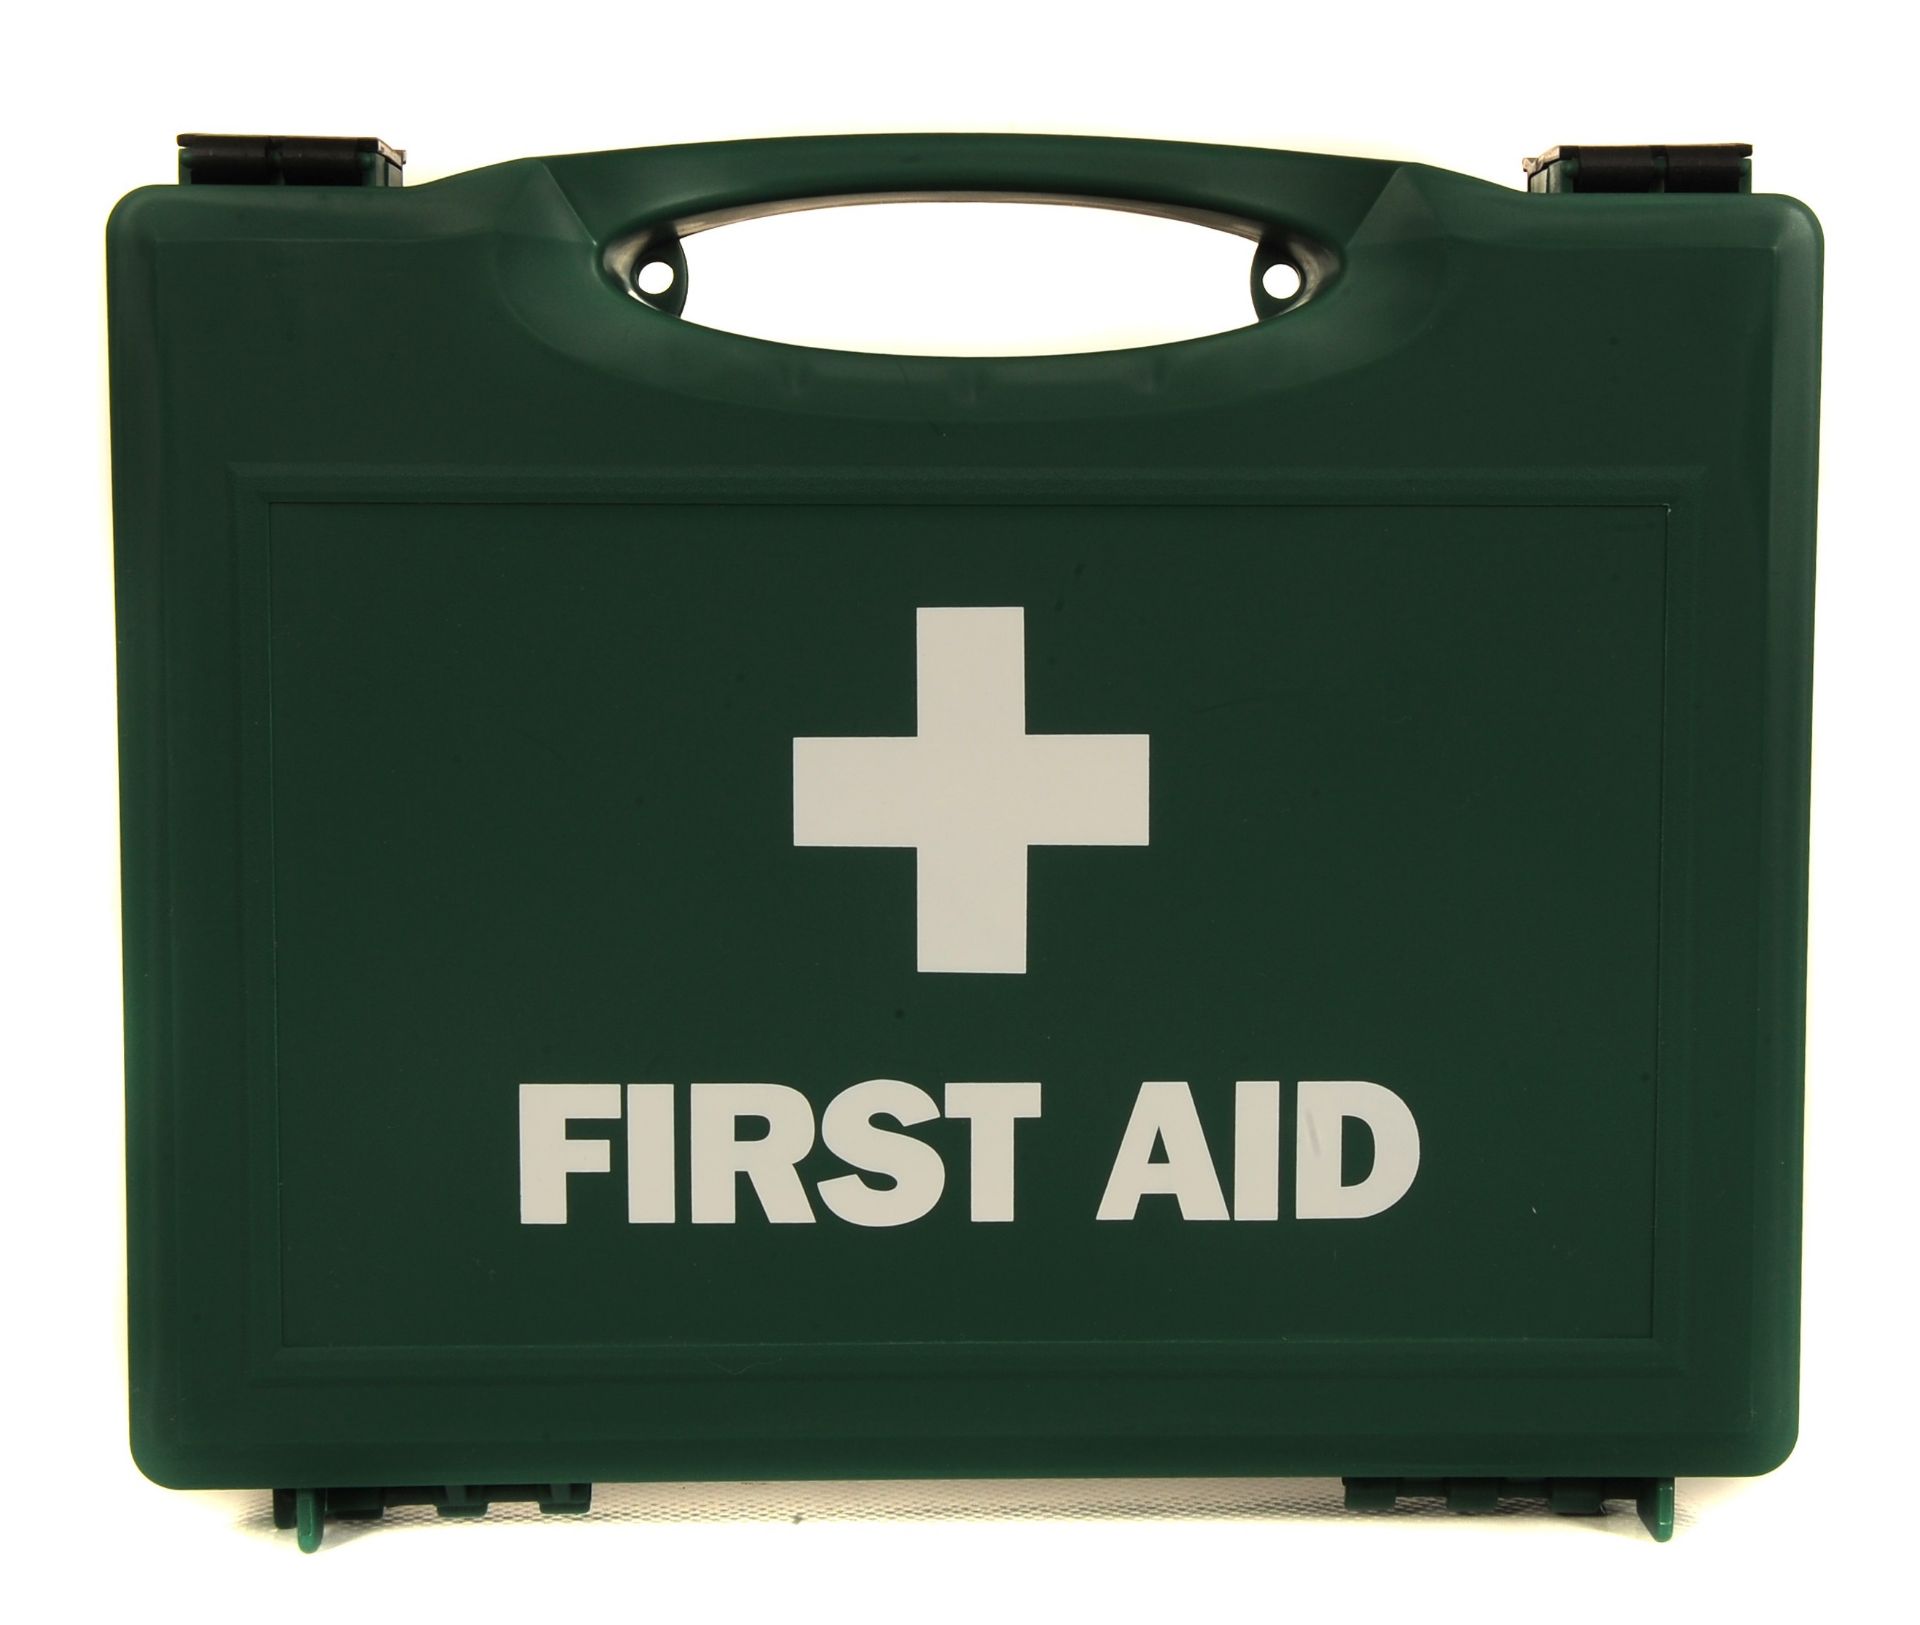 1 x Blue Dot First Aid Kit in Durable Hard Plastic Case - Conforms to BS 8599 Standard - New and - Image 3 of 5